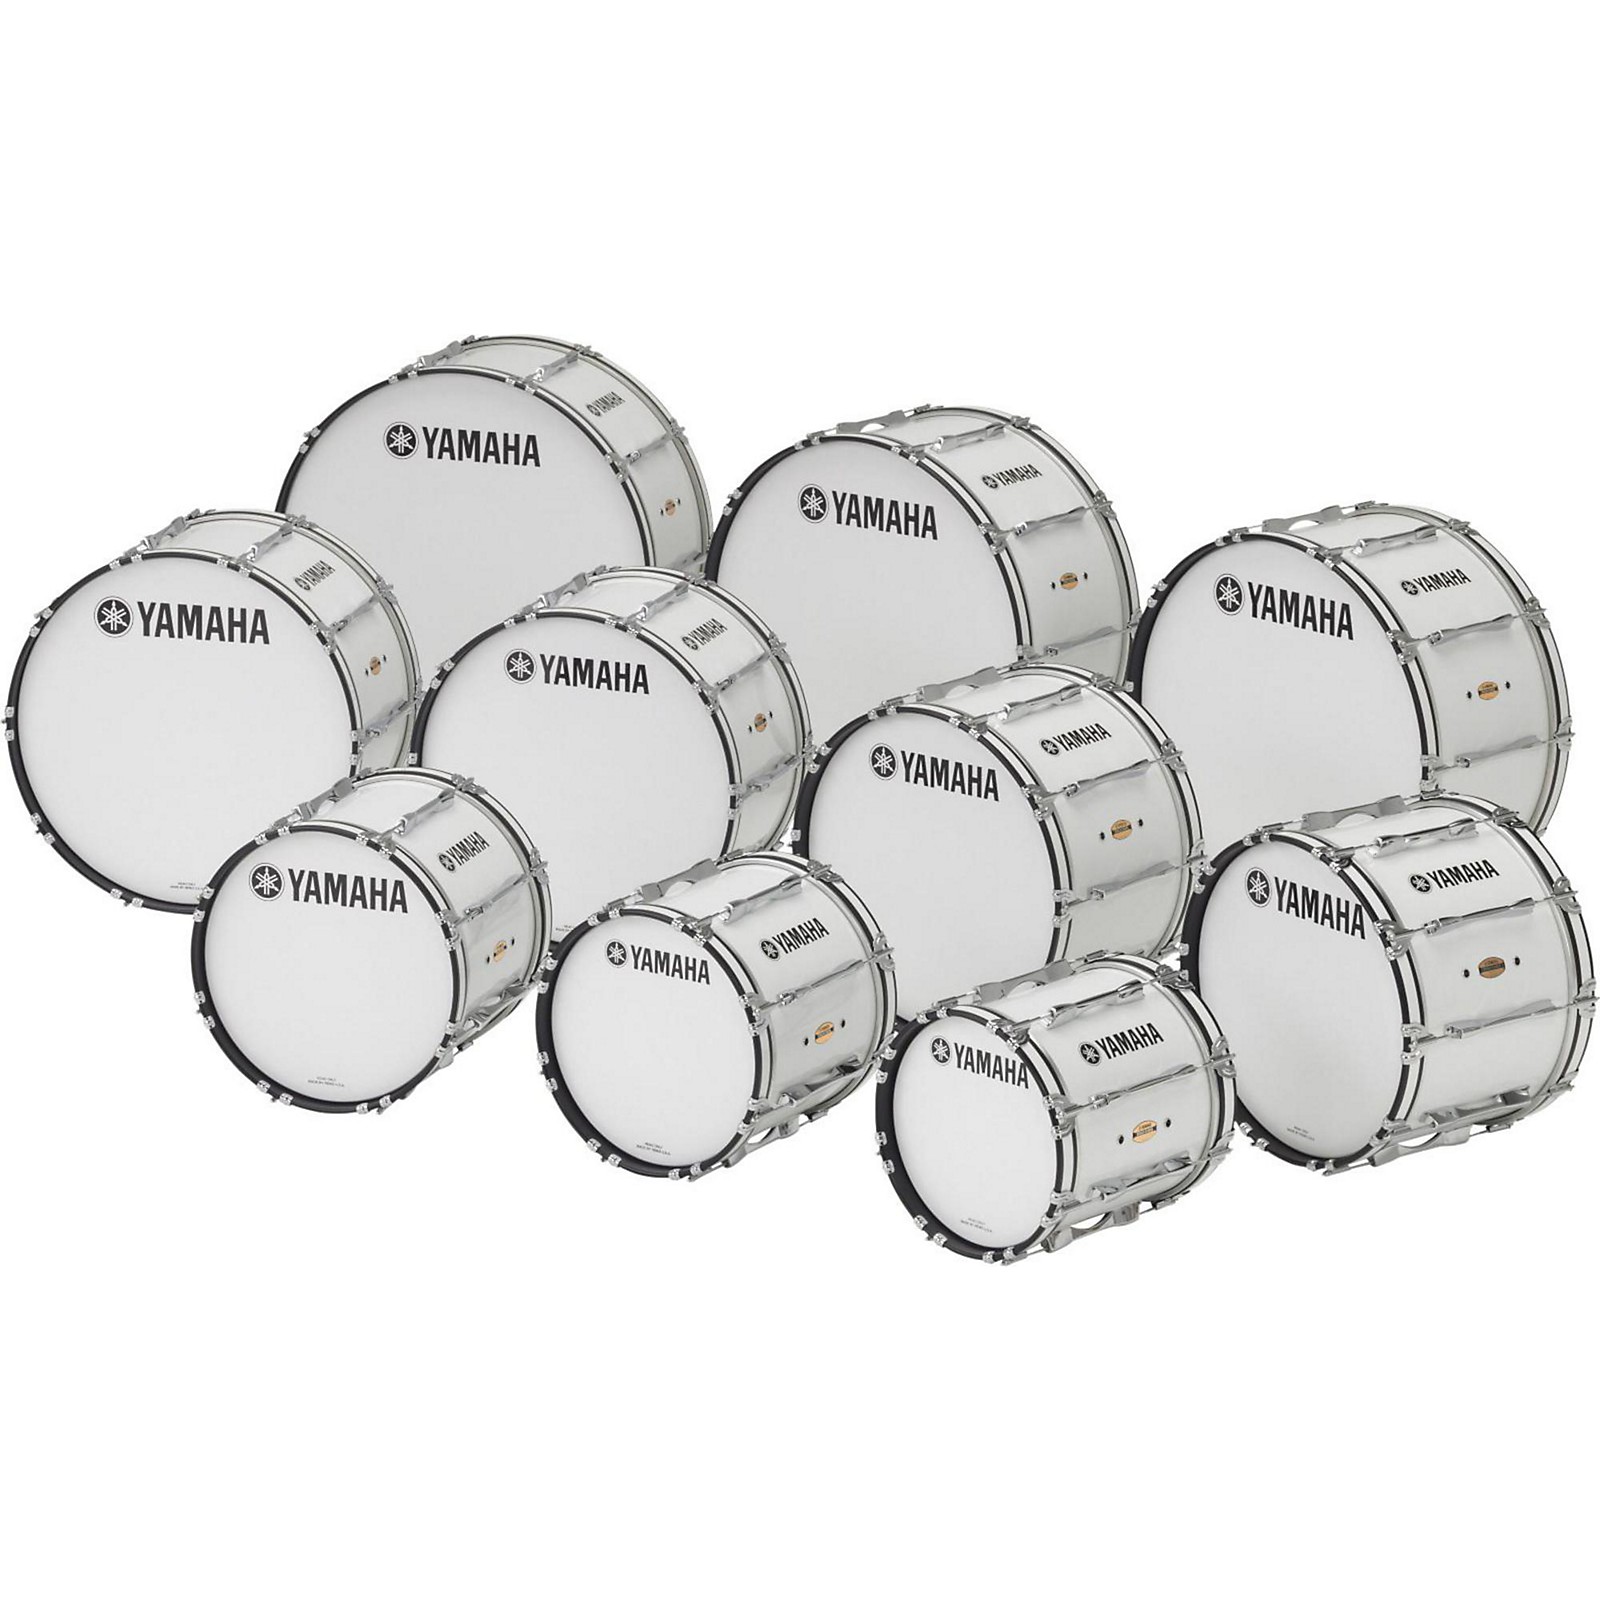 https://media.musicarts.com/is/image/MMGS7/22-x-14-8300-Series-Field-Corps-Marching-Bass-Drum-White-Forest/J08061000004000-00-1600x1600.jpg